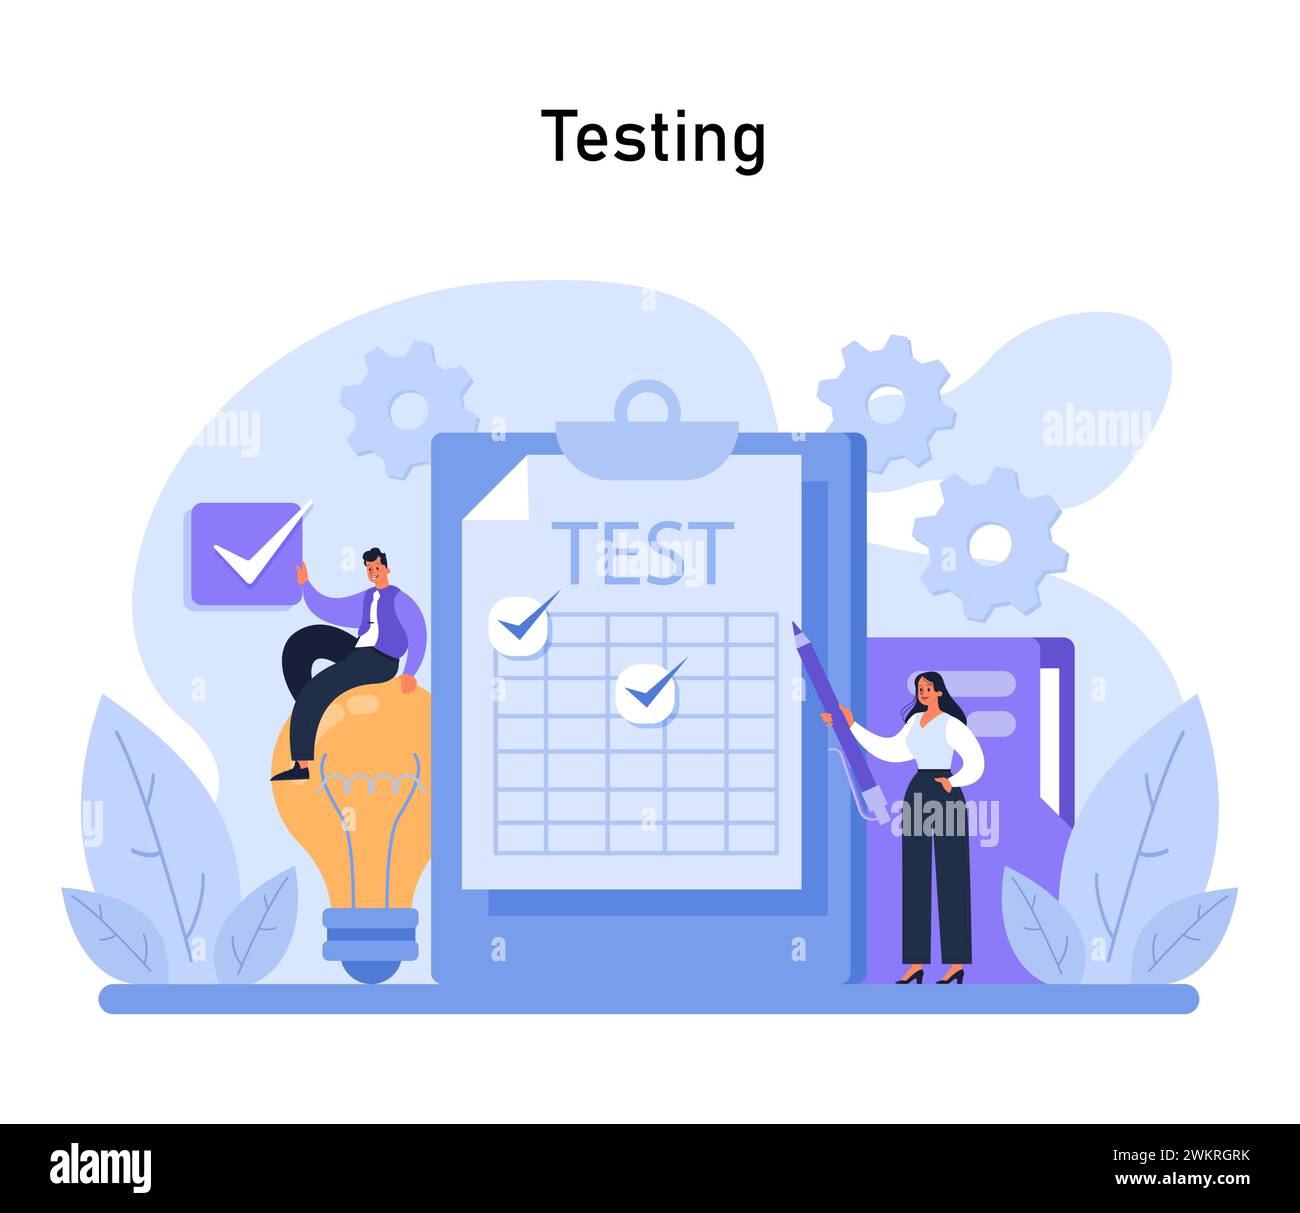 Testing phase visual. Professionals rigorously evaluate a product, focusing on quality assurance and user satisfaction within the Design Thinking framework. Flat vector illustration Stock Vector